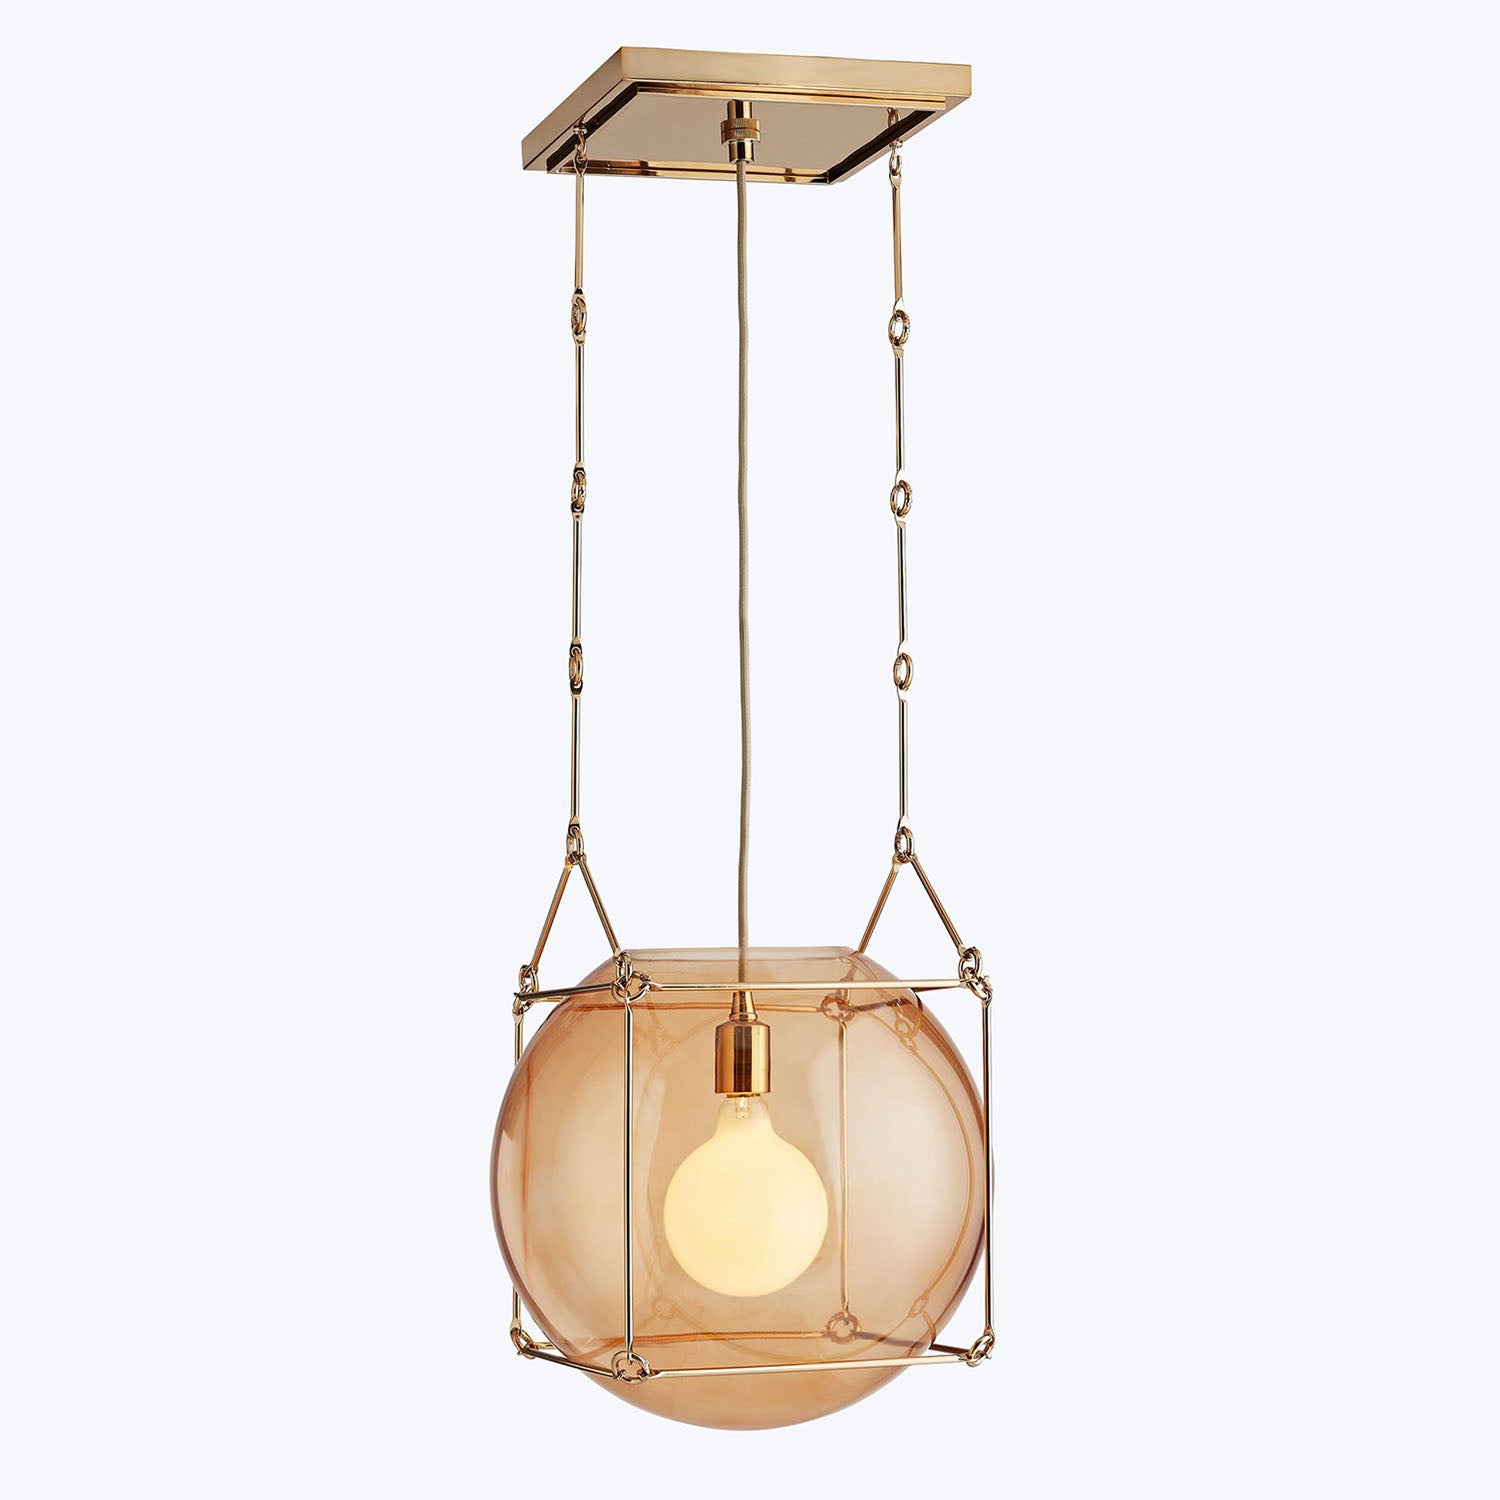 Modern pendant light with amber-tinted glass globe and geometric frame.